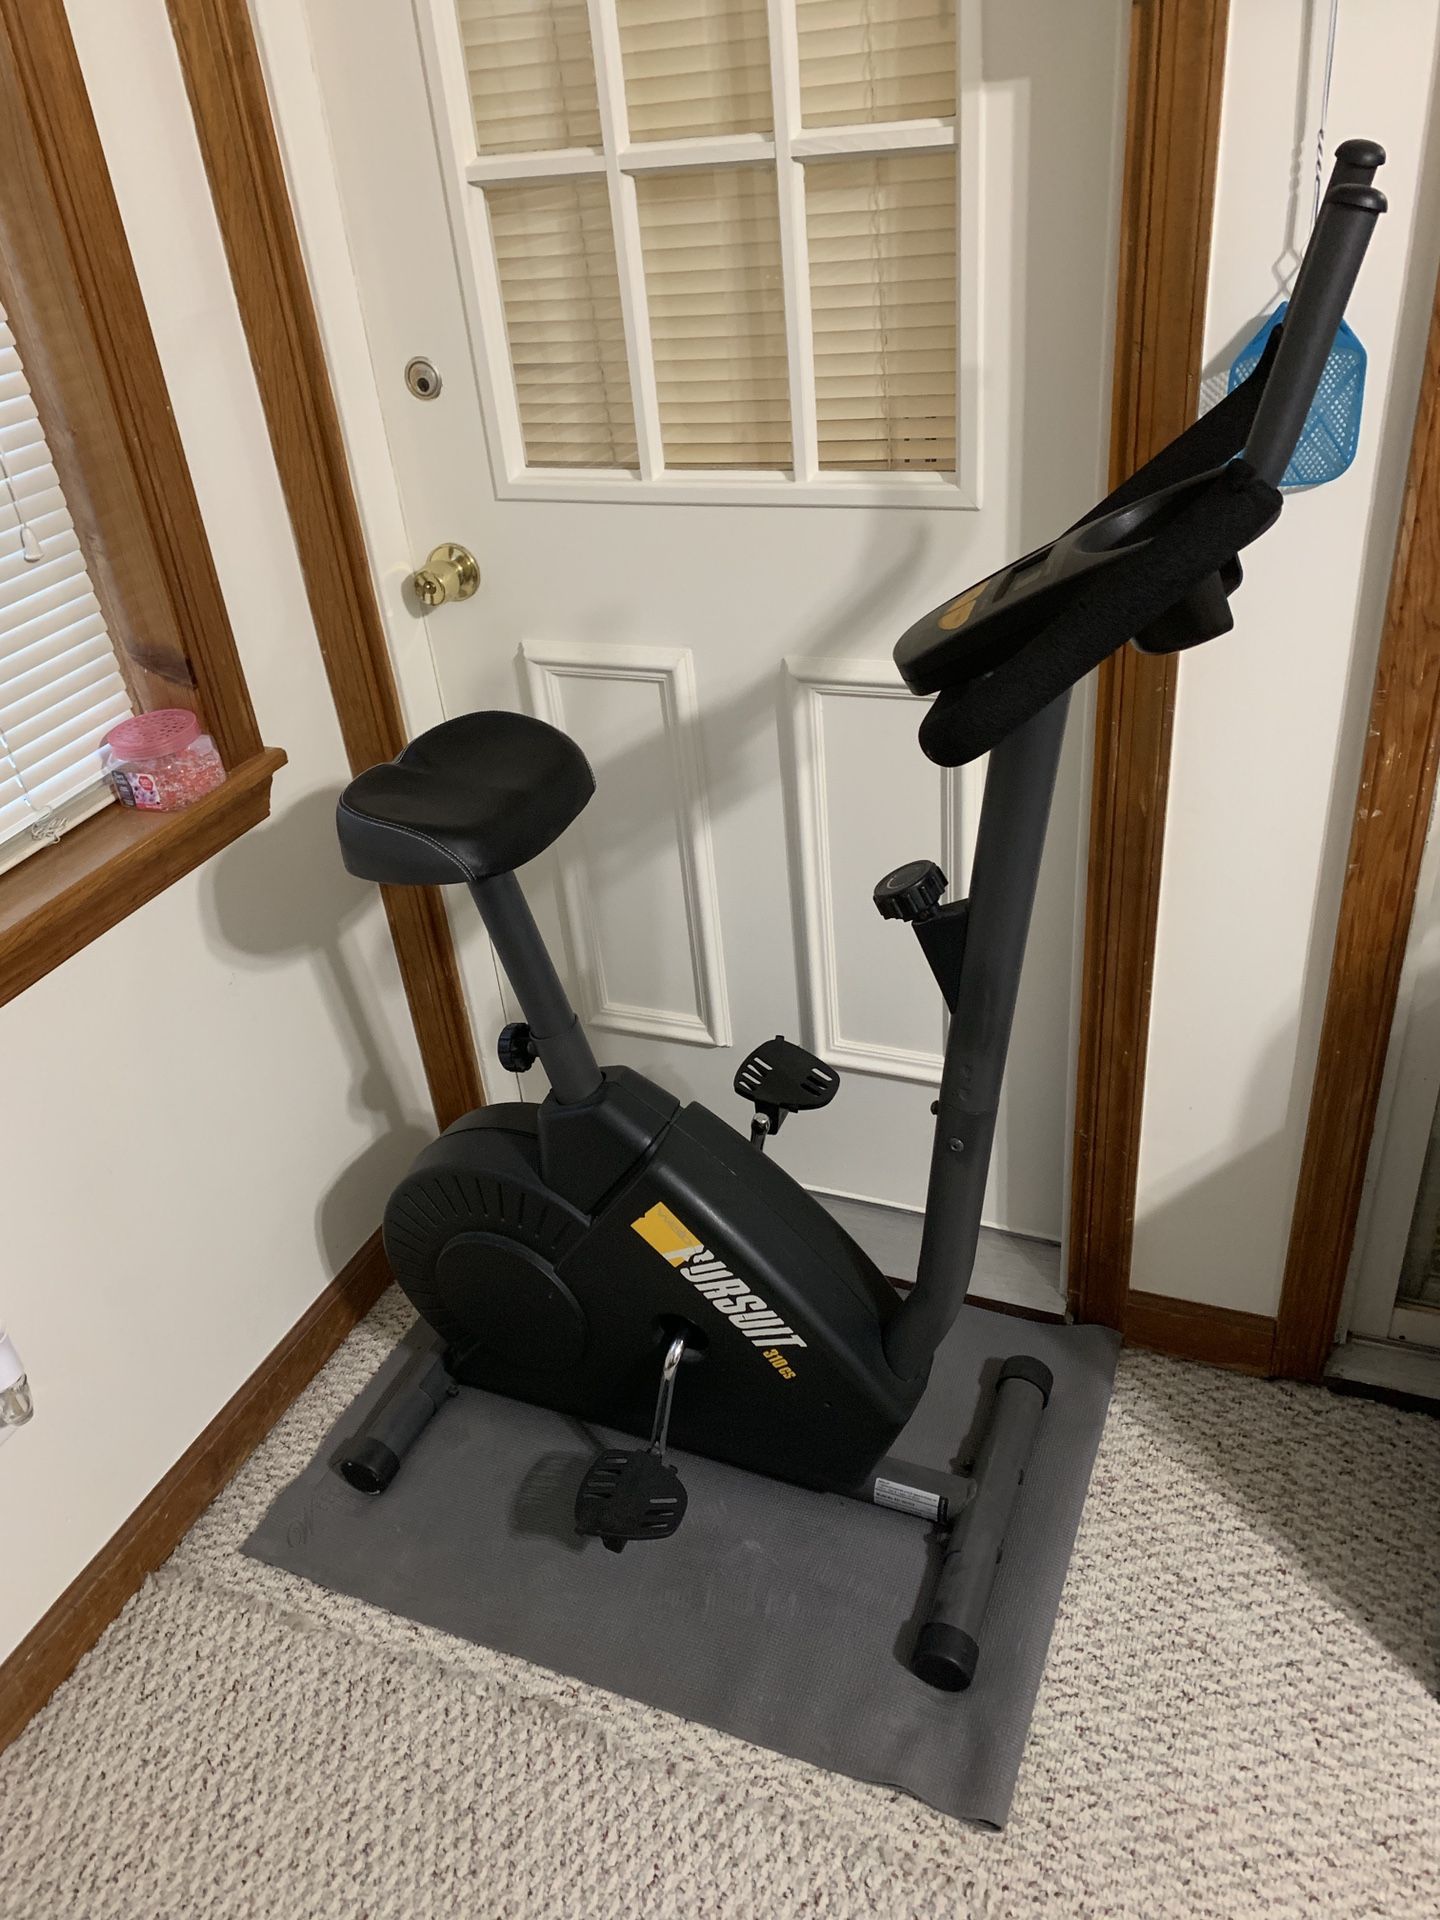 Exercise bike (gray yoga mat included)